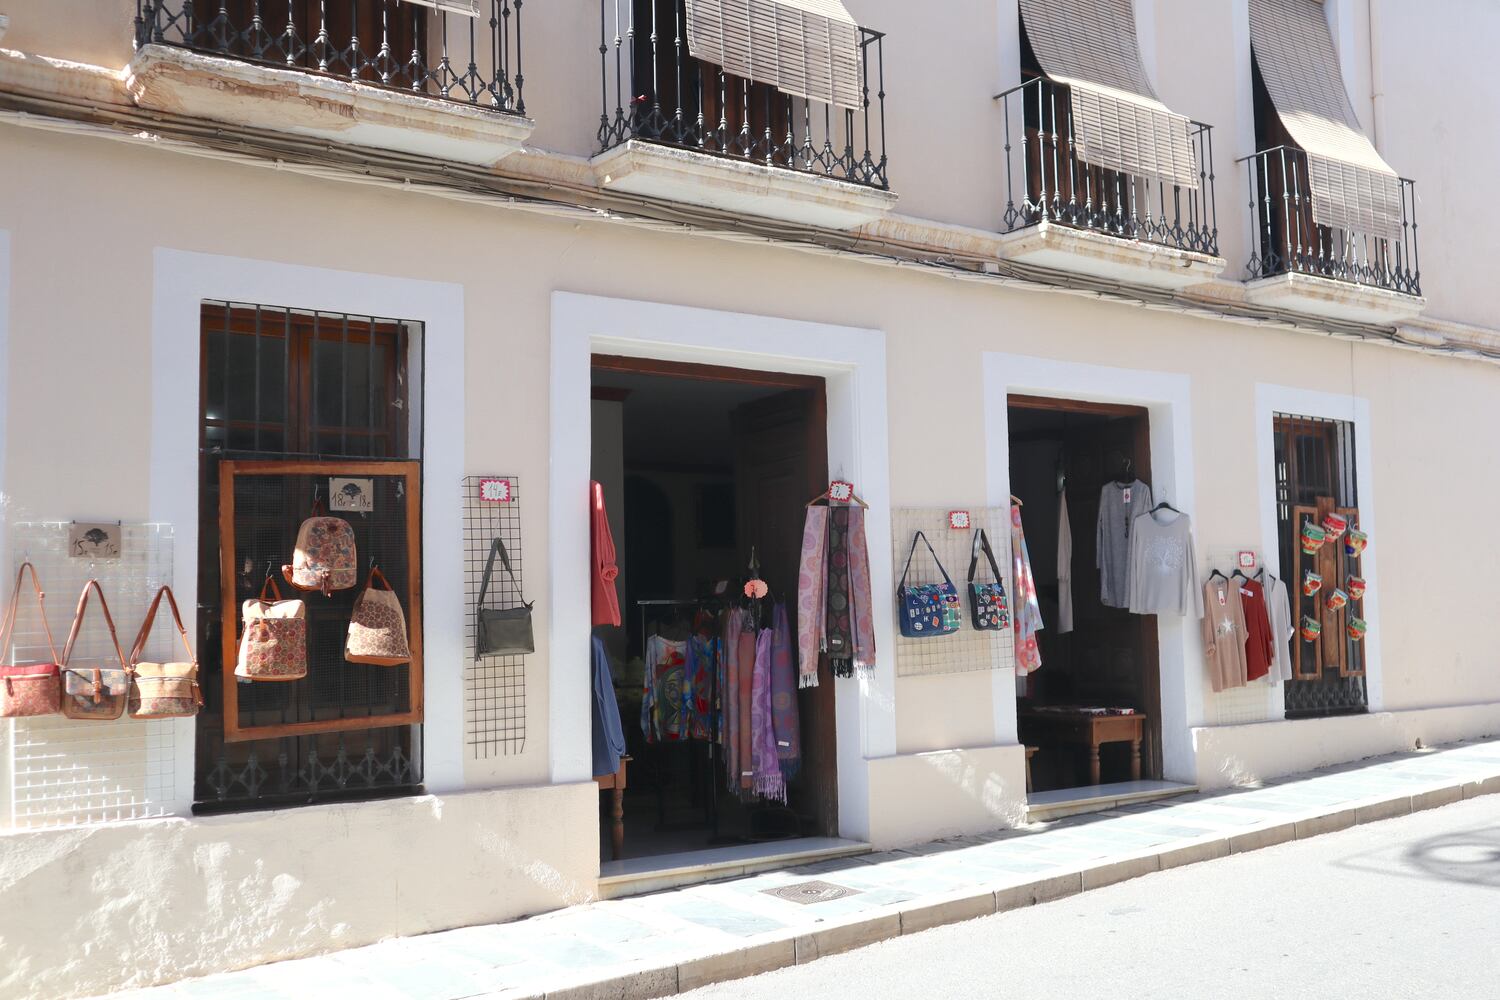 A street view of a quaint shop front with traditional clothing and souvenirs on display in an old European town.